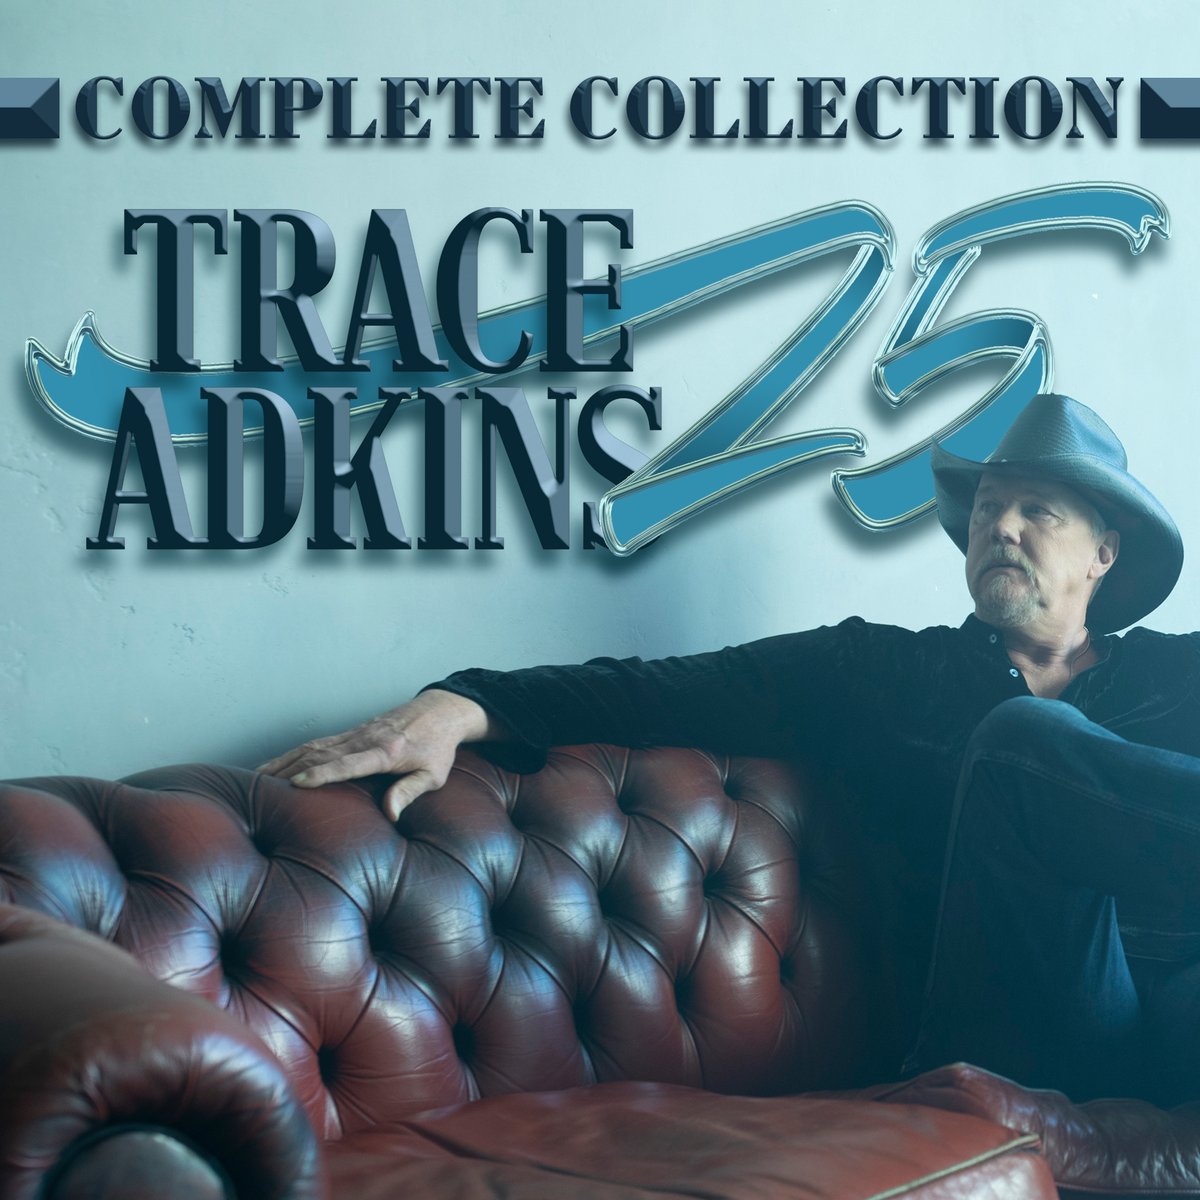 #MusicMonday Start your week right with the Trace Adkins Complete Collection playlist on @Spotify : spotify.link/psjh7lXmDIb